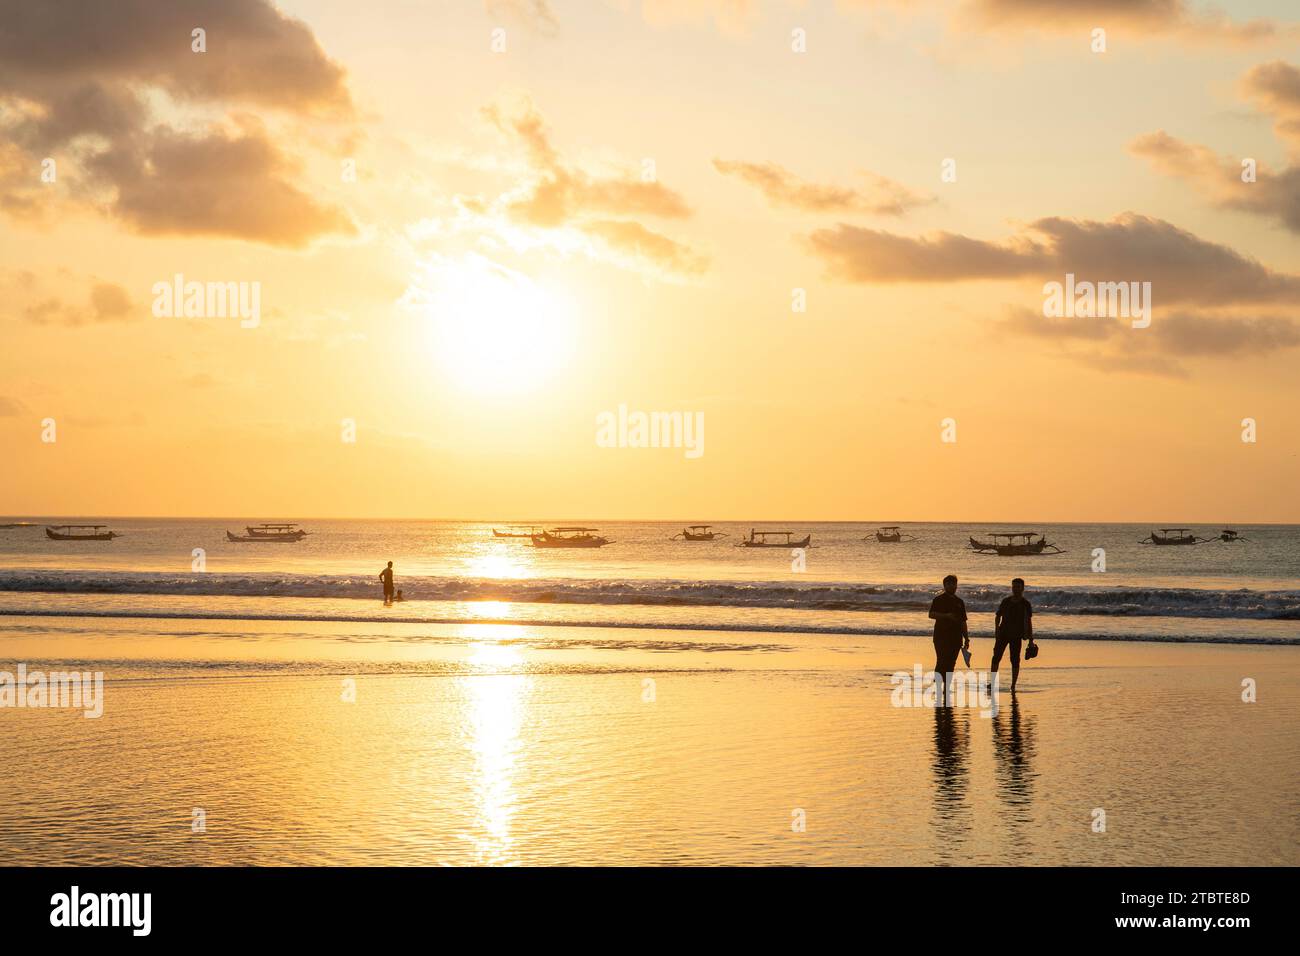 Dreamlike sunset on the dream beach of Kuta, small waves in the sea and the reflection of the sky in the shallow water, tropical Bali, Indonesia Stock Photo